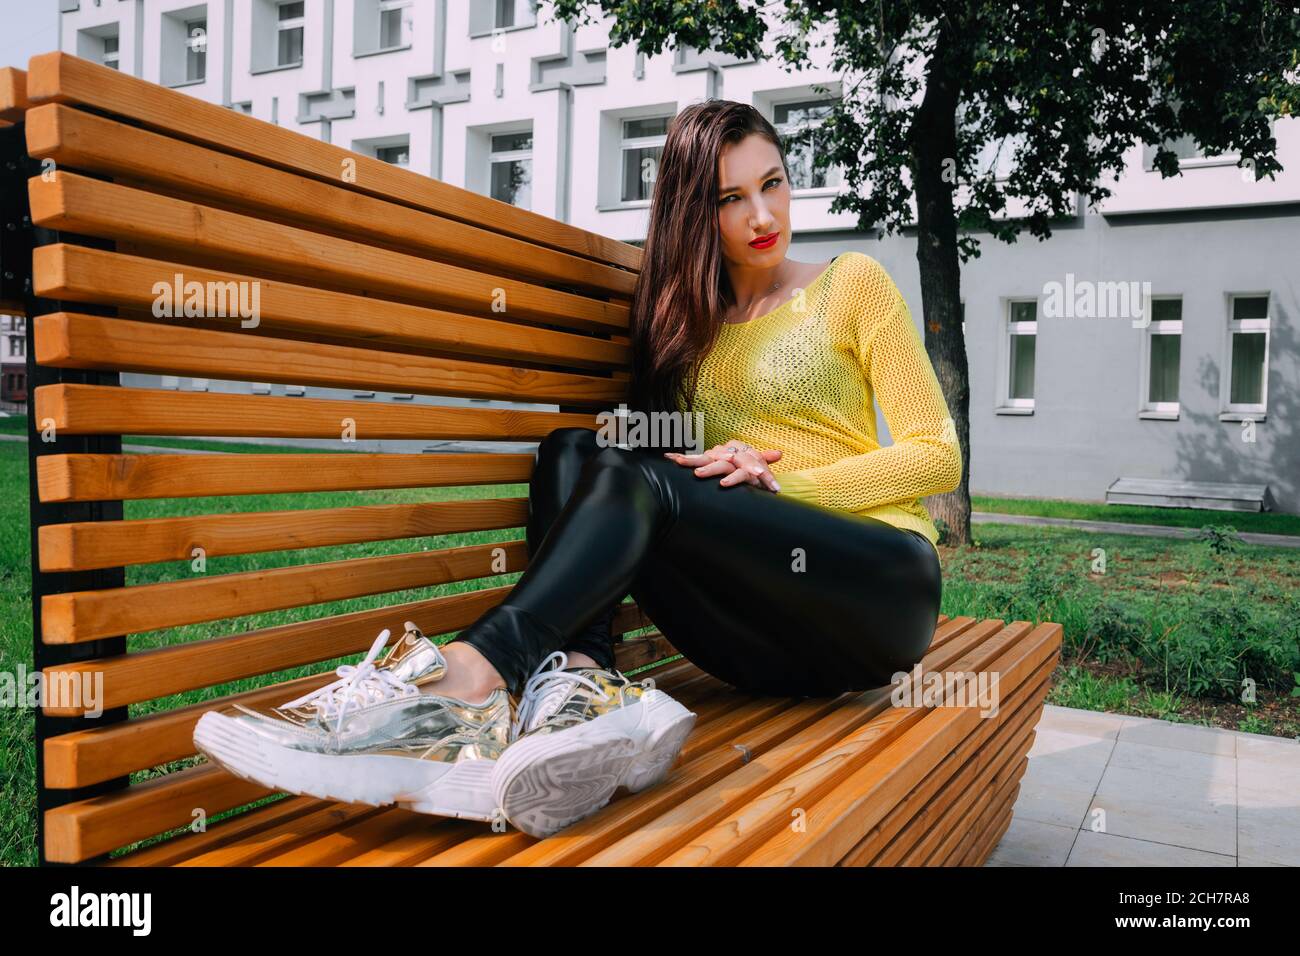 Pretty girl with long dark hair is wearing a bright yellow sweater, shiny,  tight dark leggings and golden sneakers; she sits outside on a wooden bench  Stock Photo - Alamy